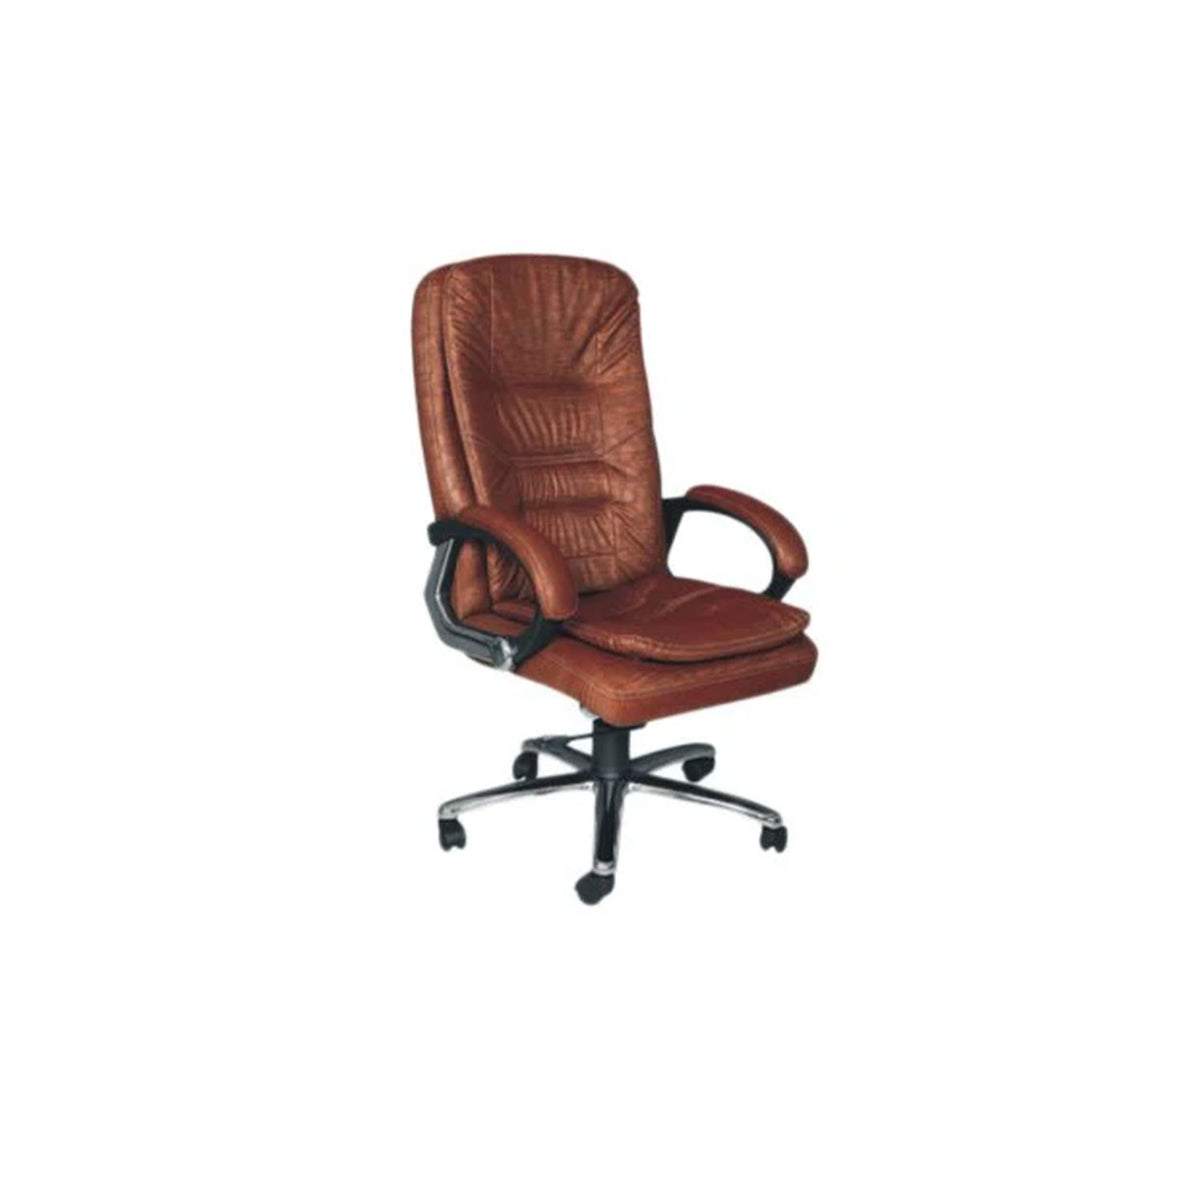 SmileSellers Leatherette Brown Designer Chair